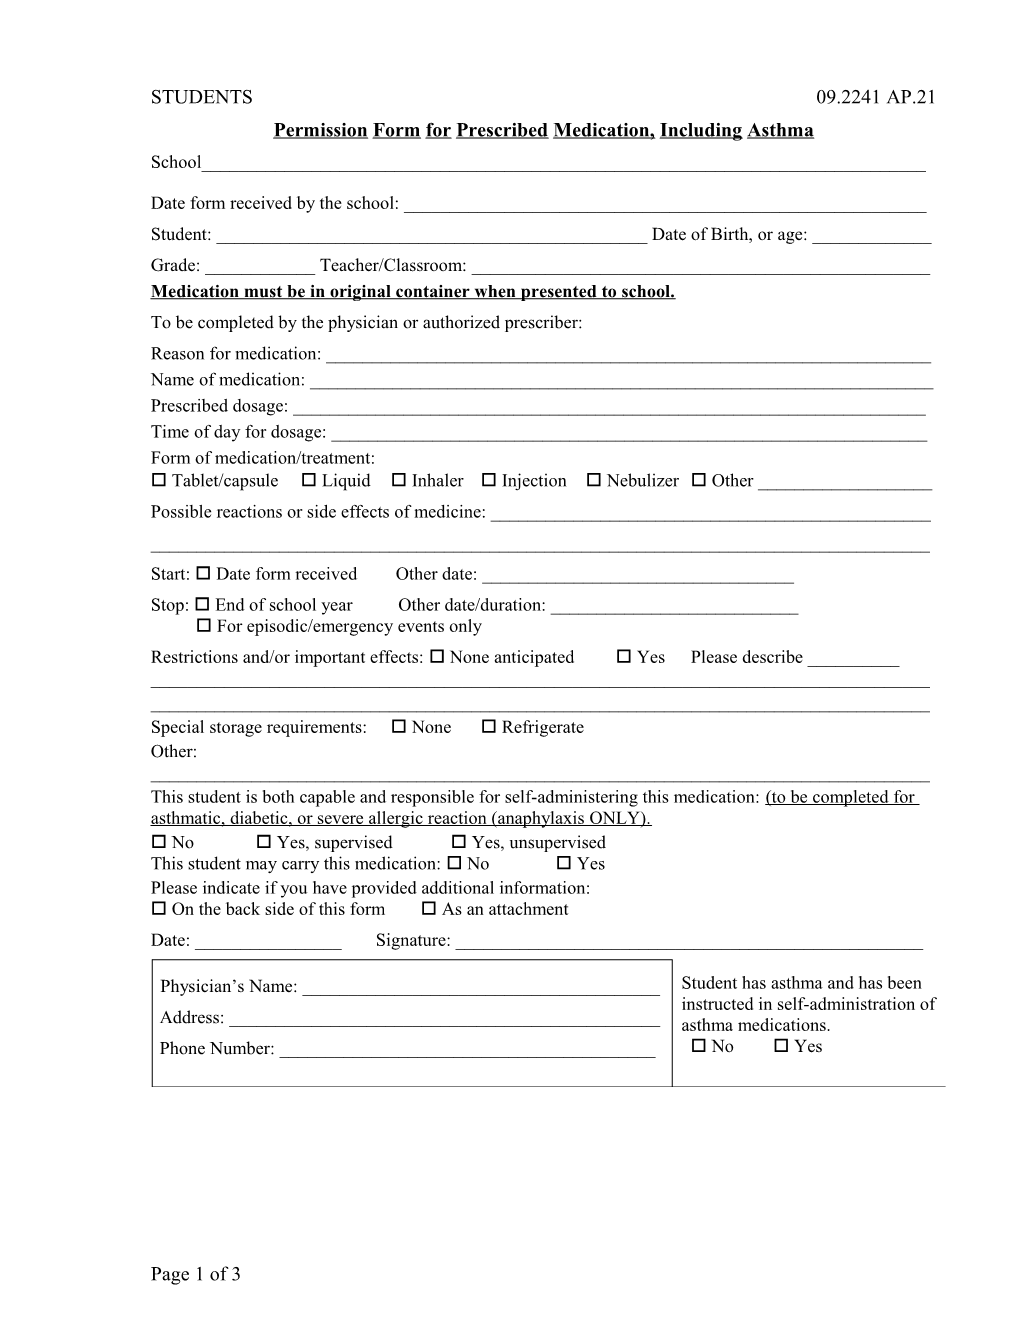 Permission Form for Prescribed Medication,Including Asthma